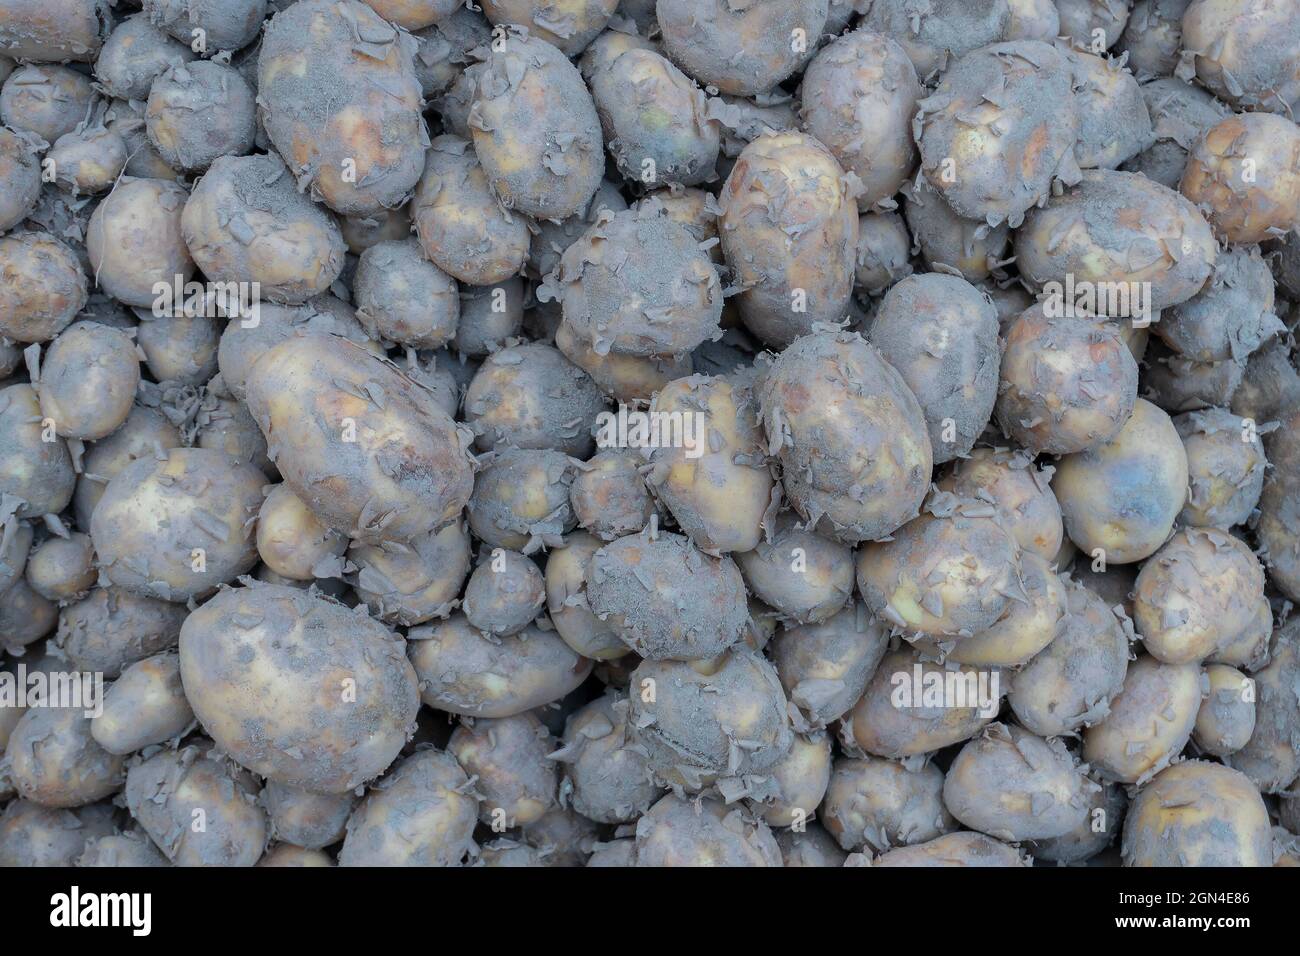 Potato is a root vegetable, a starchy tuber of the plant Solanum tuberosum. Vegetables for sale in a market in Territy Bazar, Kolkata, West Bengal, In Stock Photo